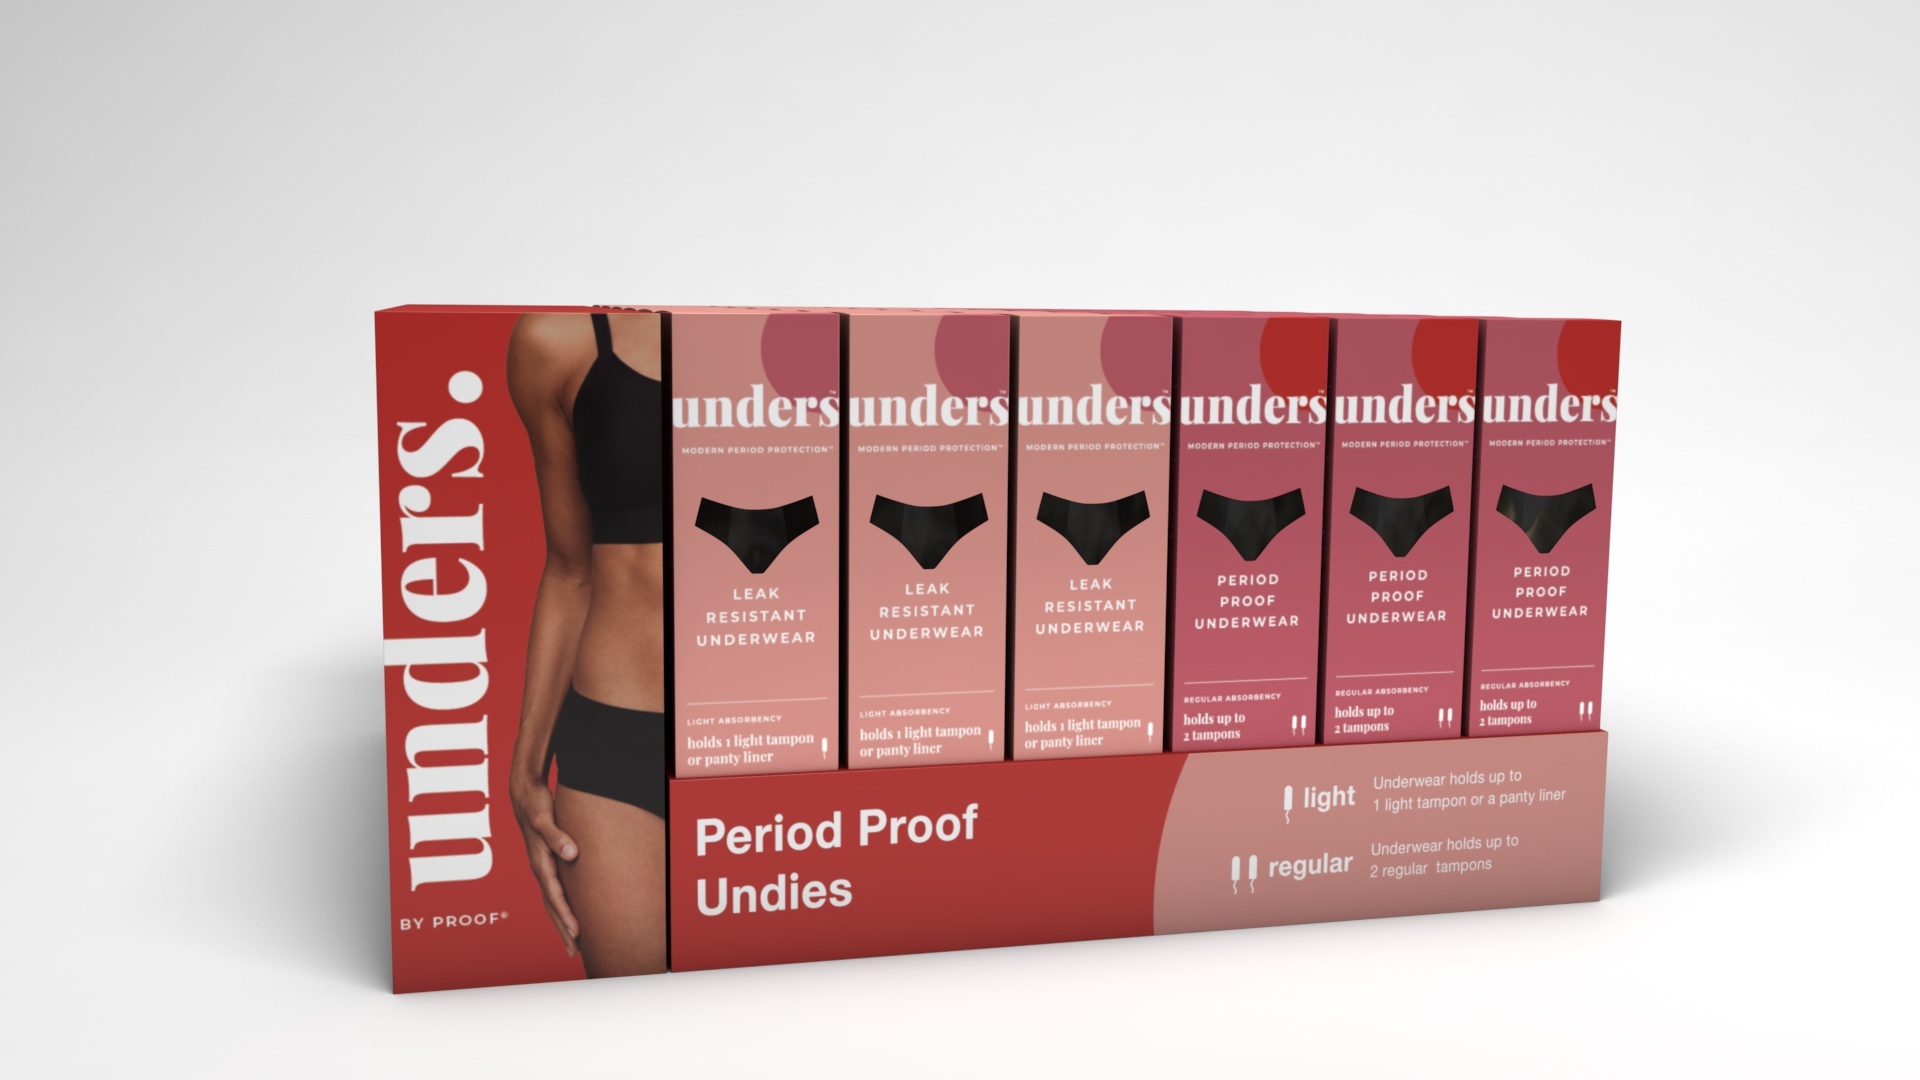 Unders by Proof® Launches in Target Stores Nationwide as First